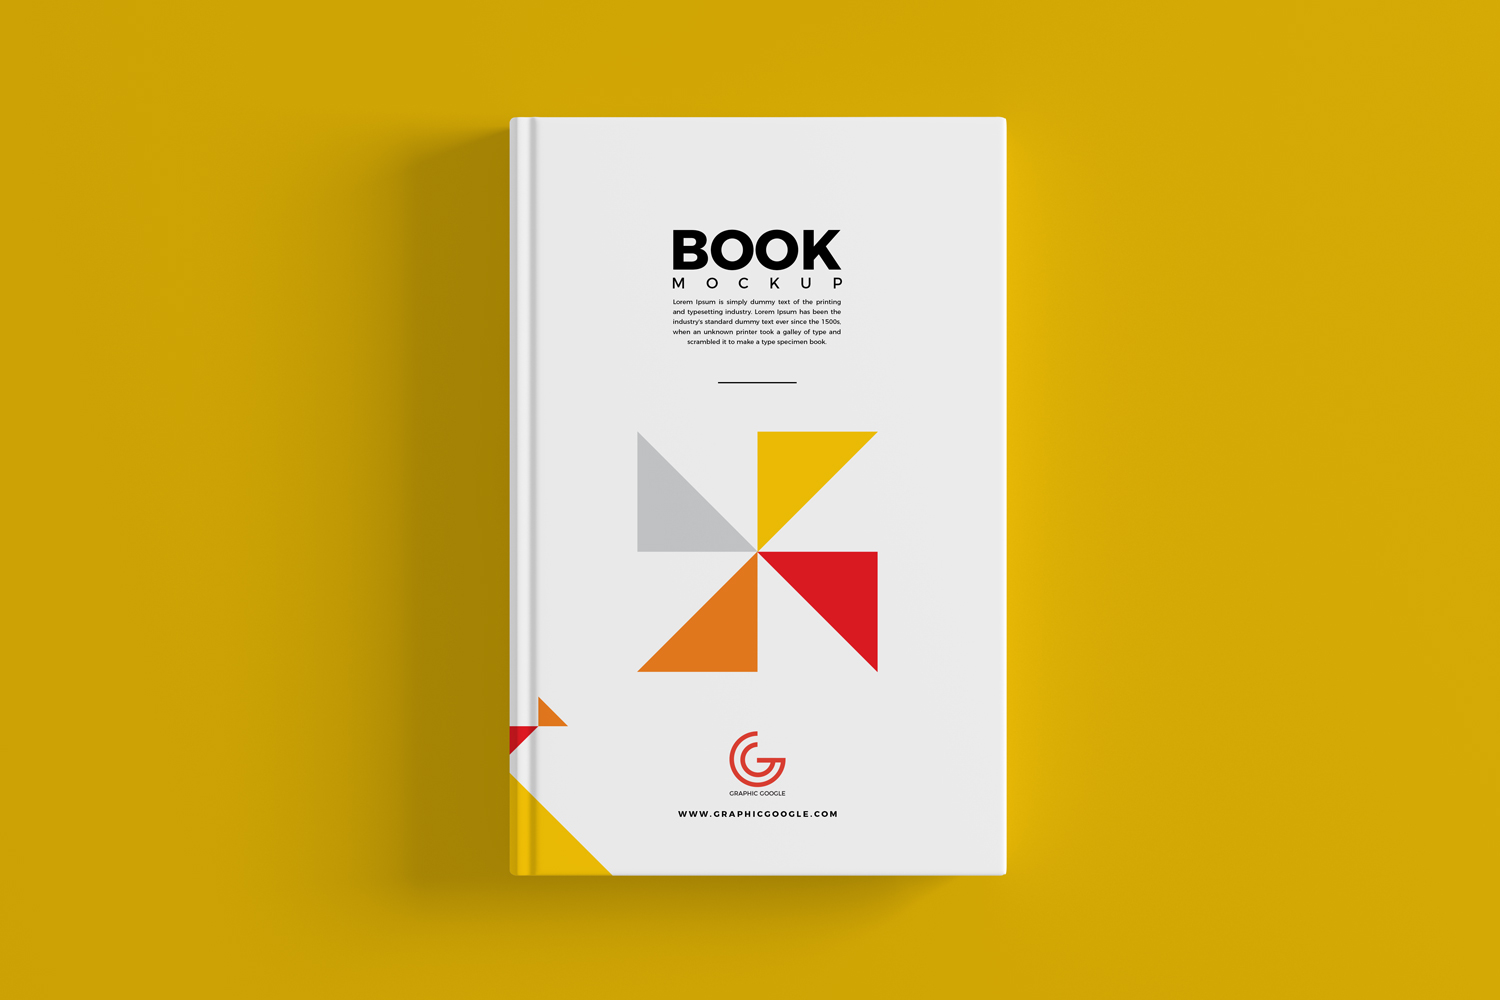 Free Book Mockup PSD for Cover Branding